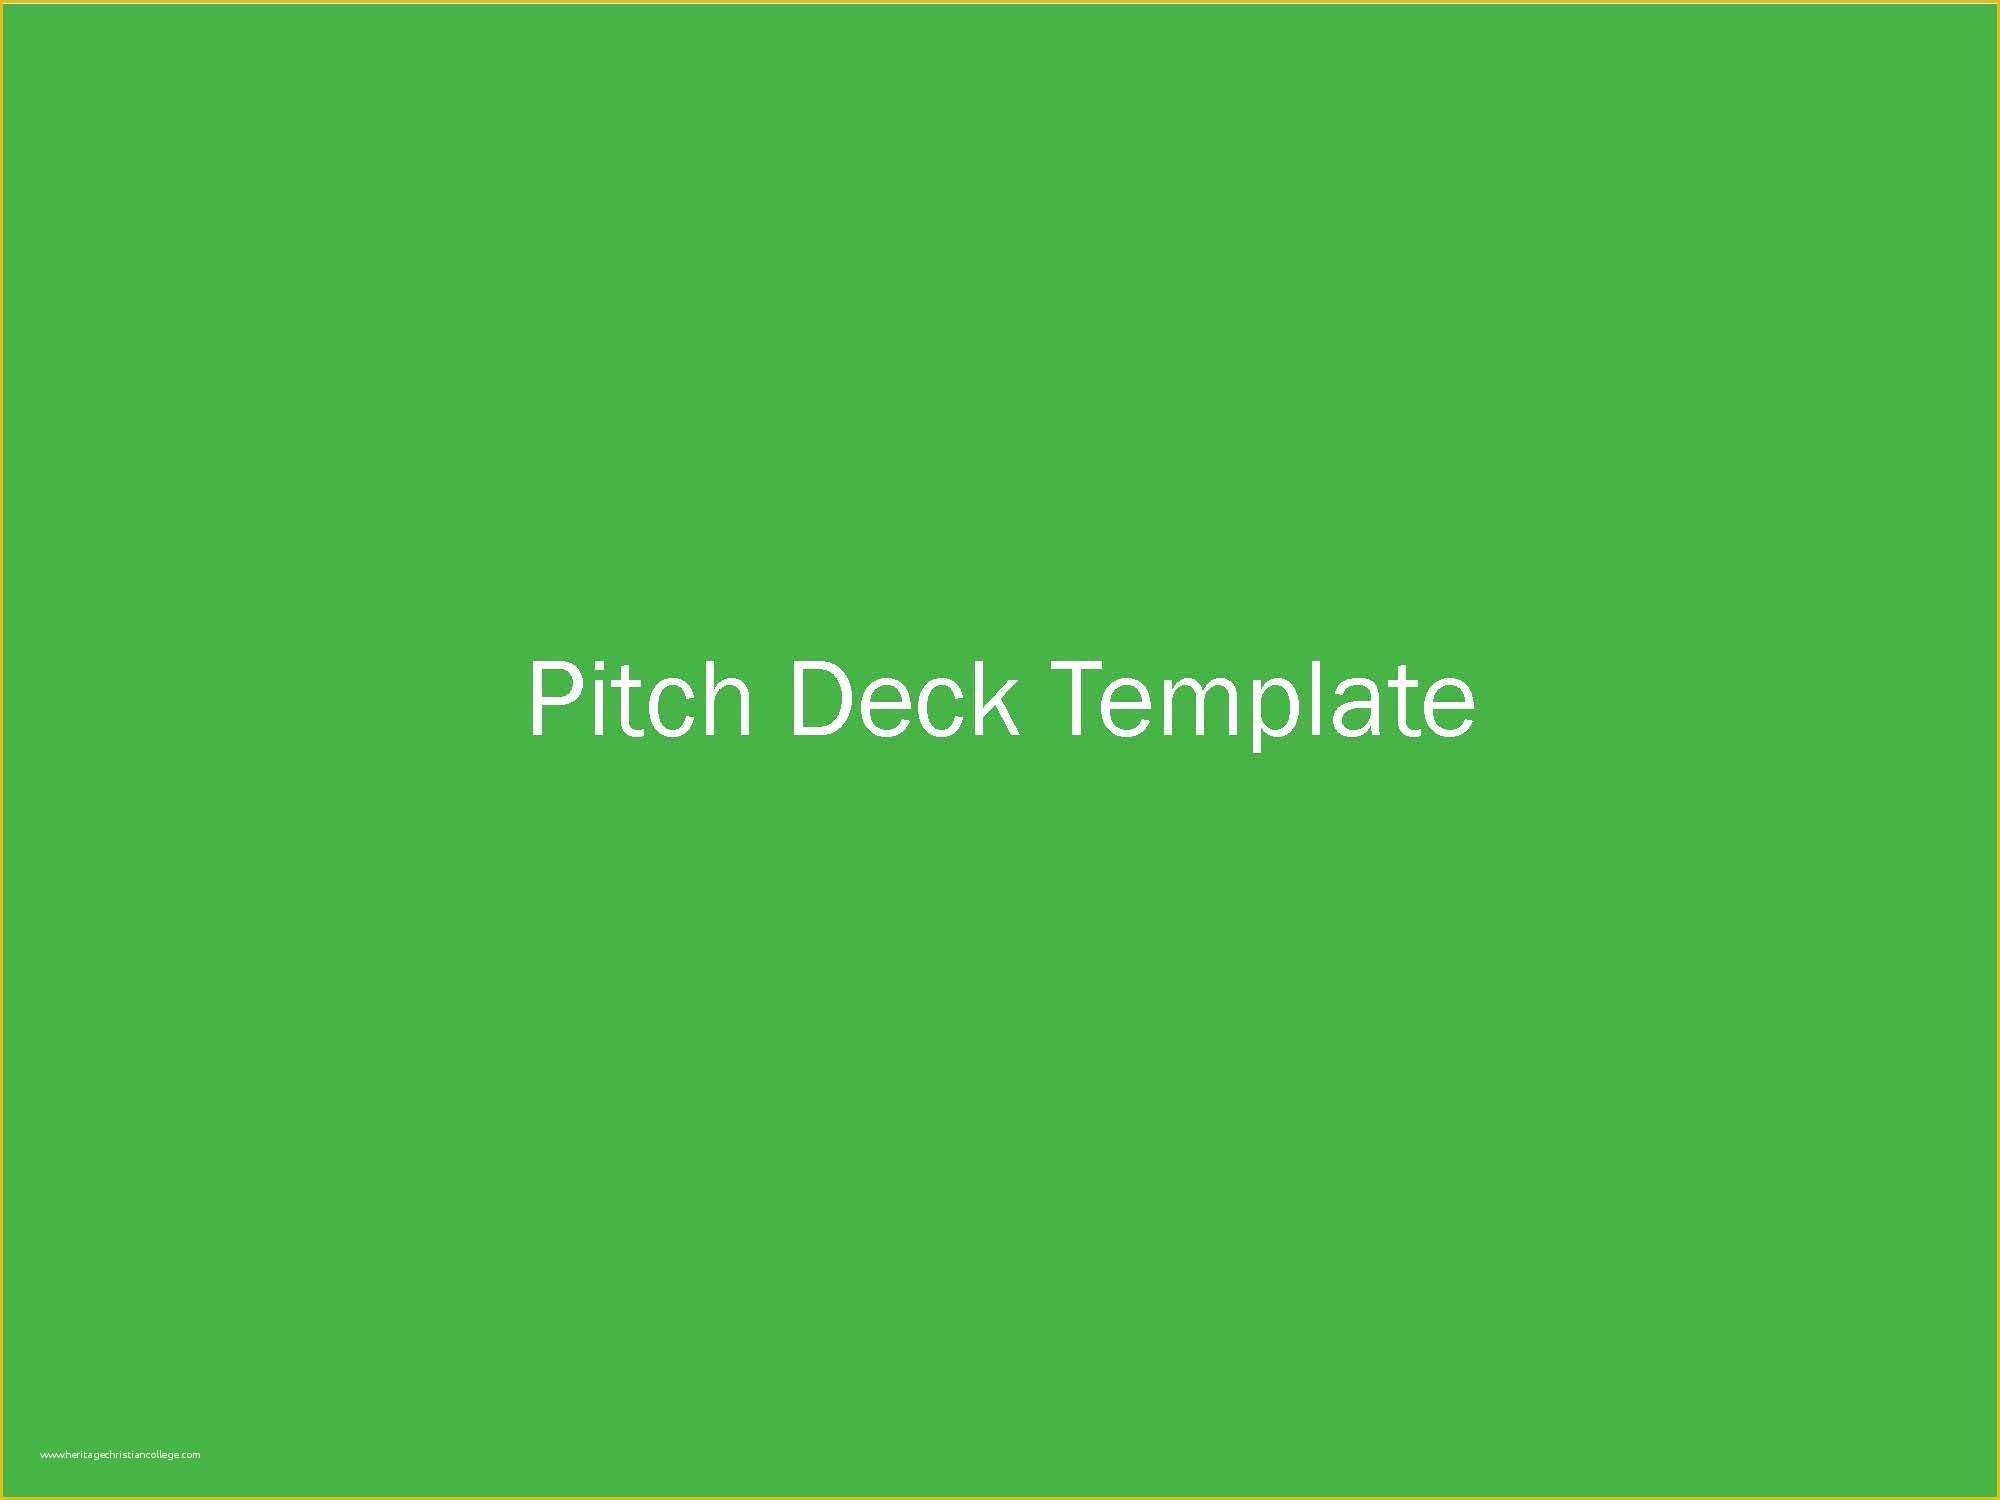 Investor Deck Template Free Of How to Make A Killer Deck with This Pitch Deck Template